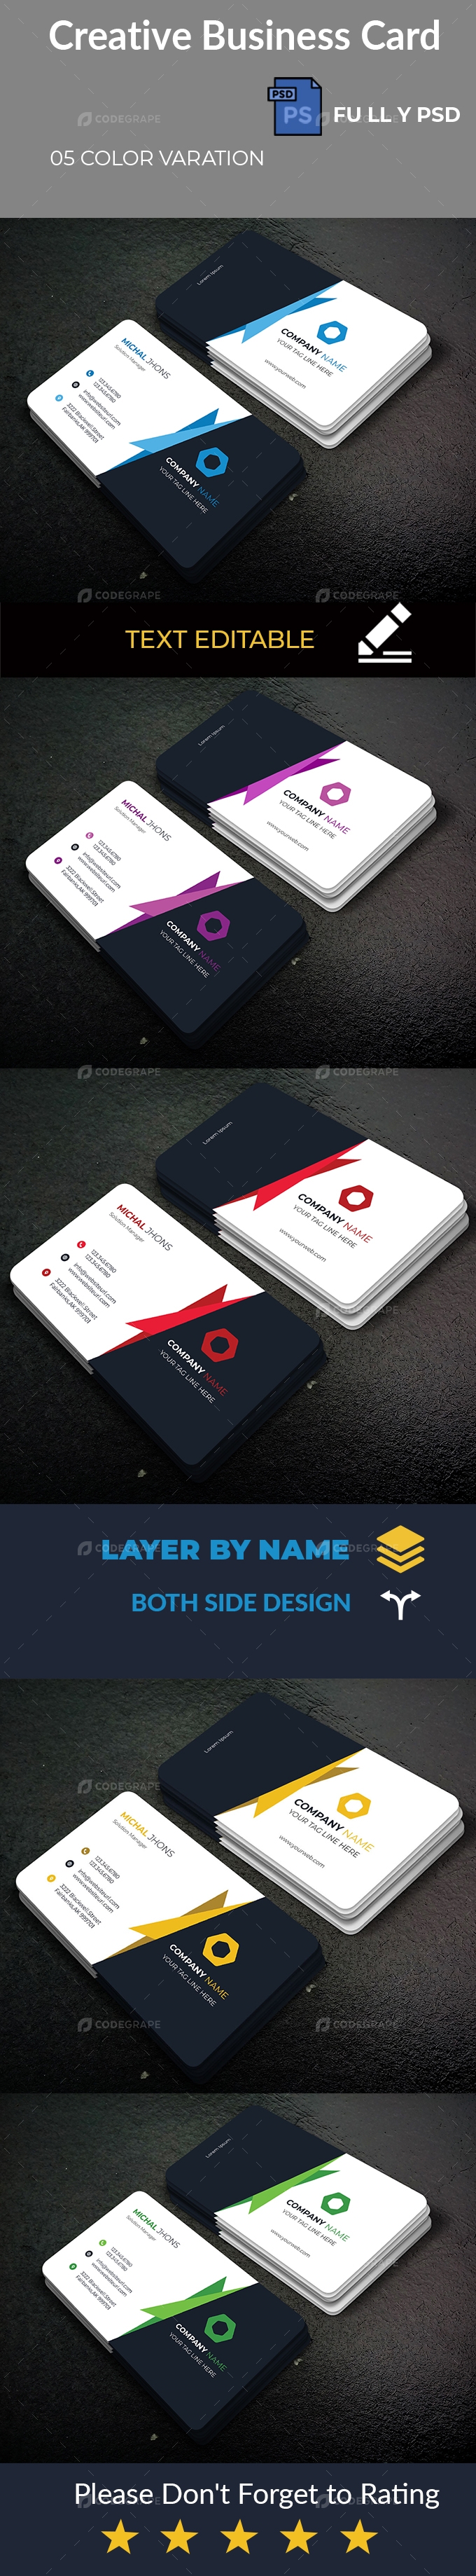 Global Business Business Card